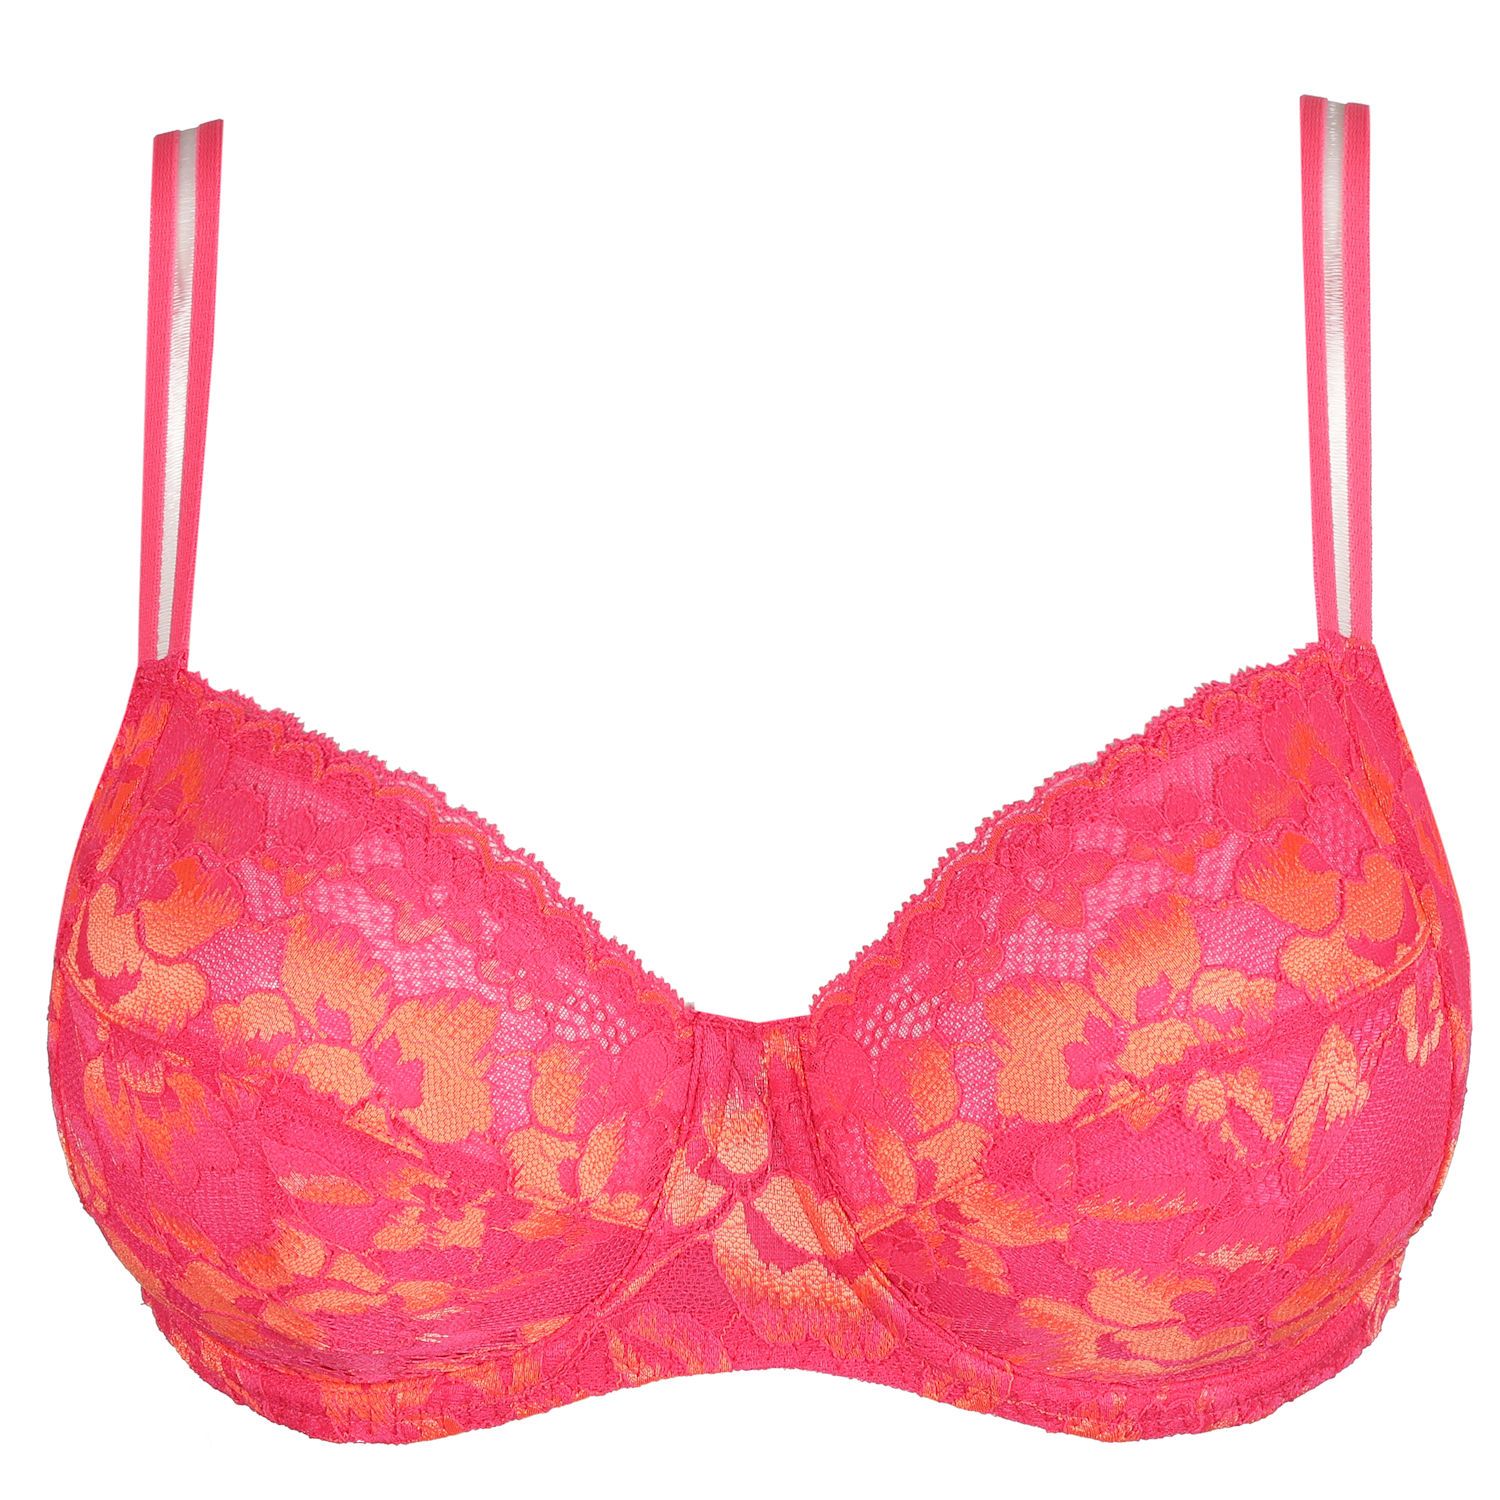 https://www.lumingerie.com/images/products/verao-0142370-full-cup-rintaliivit-l-a-pink-f-cutout_orig.jpg